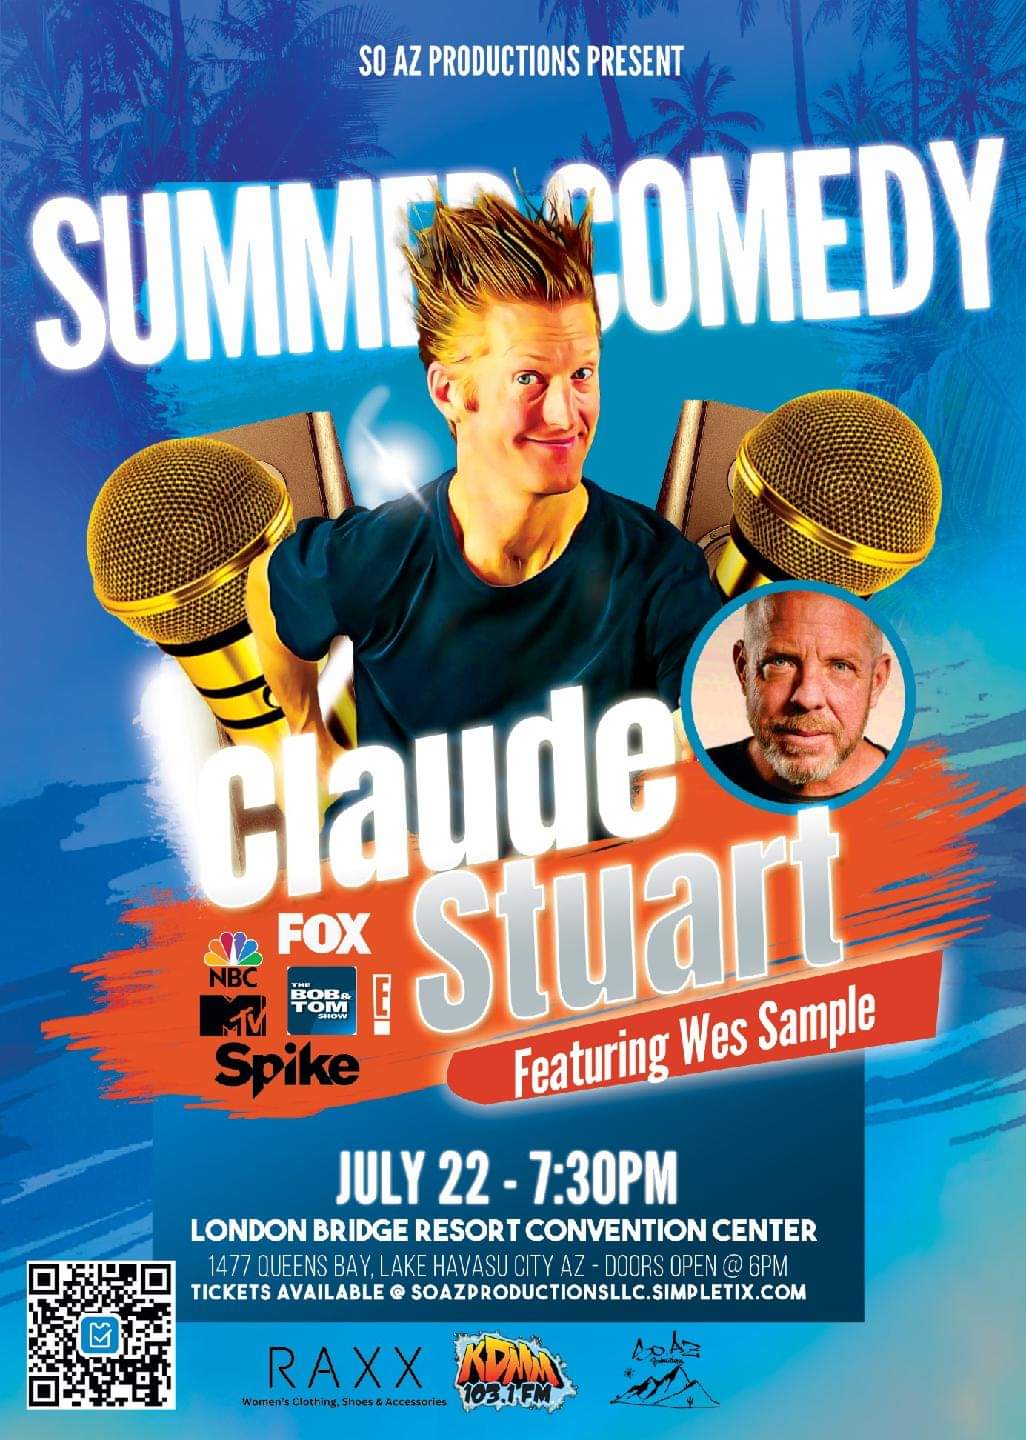 Summer Comedy Show With Claude Stuart Featuring Wes Sample